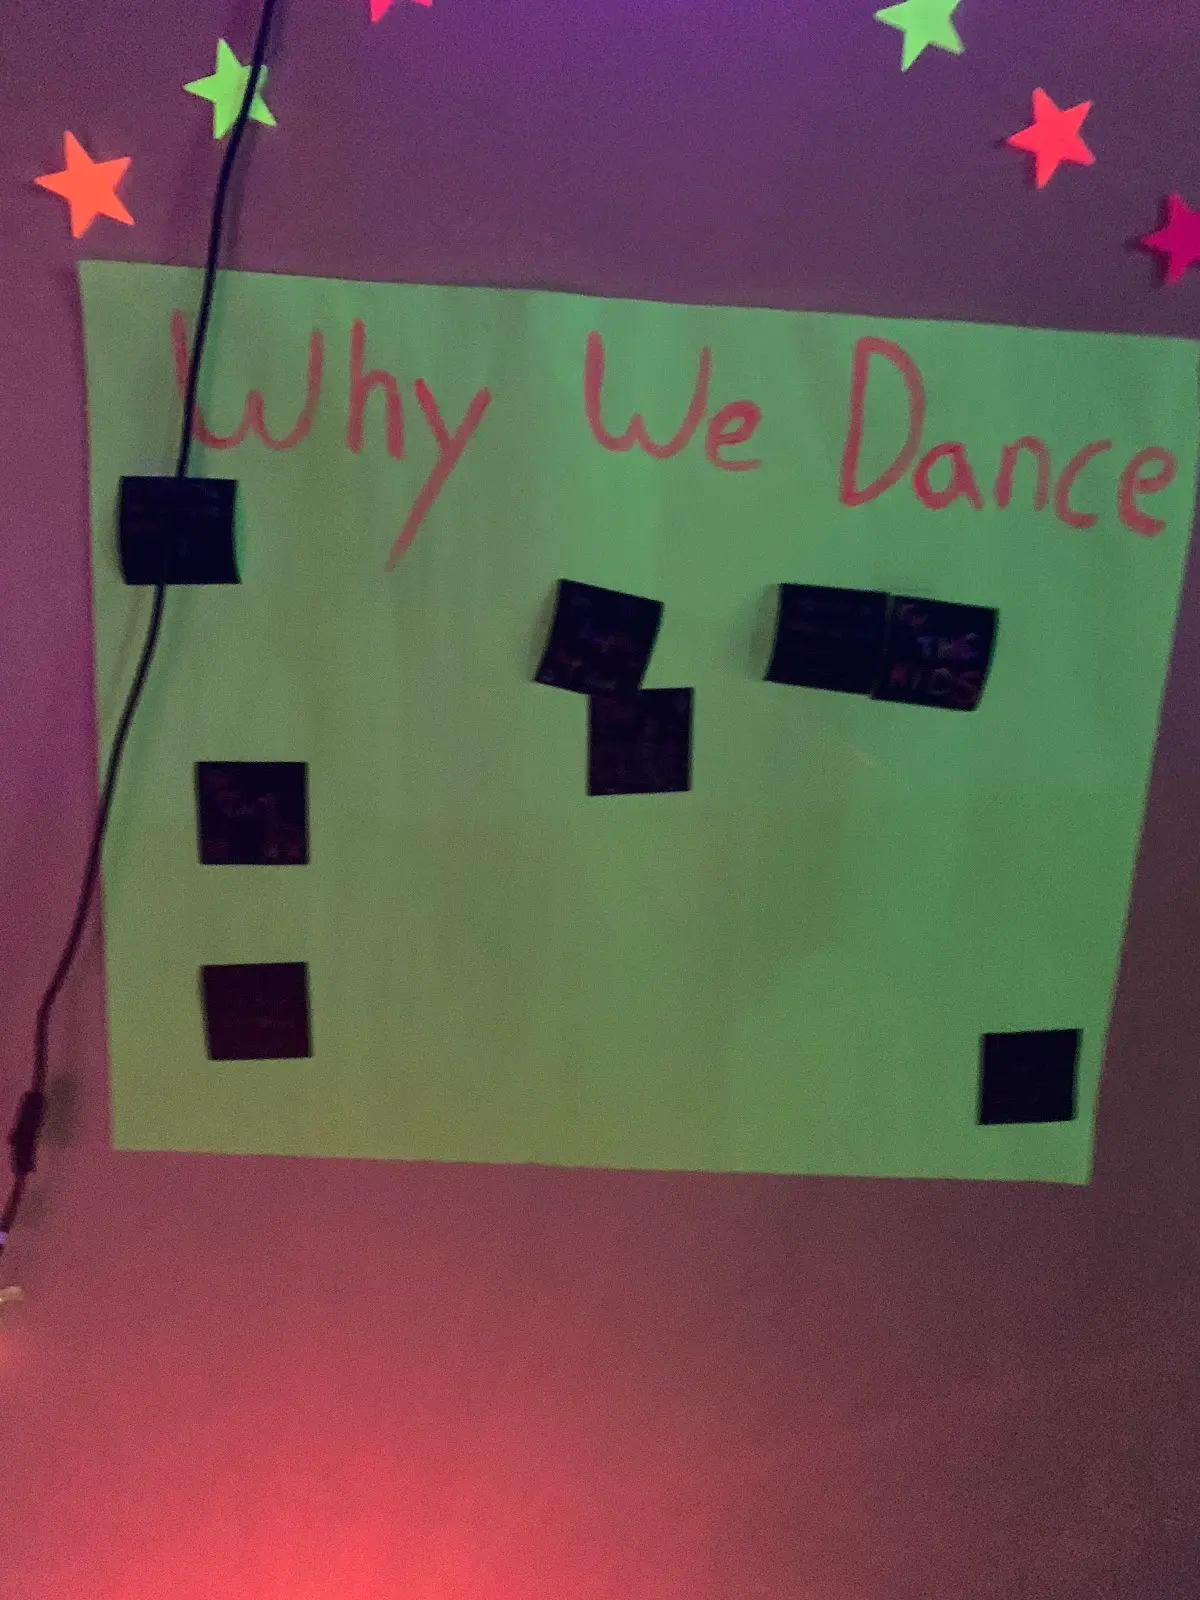 The "Why We Dance" board at Dance All Knight.